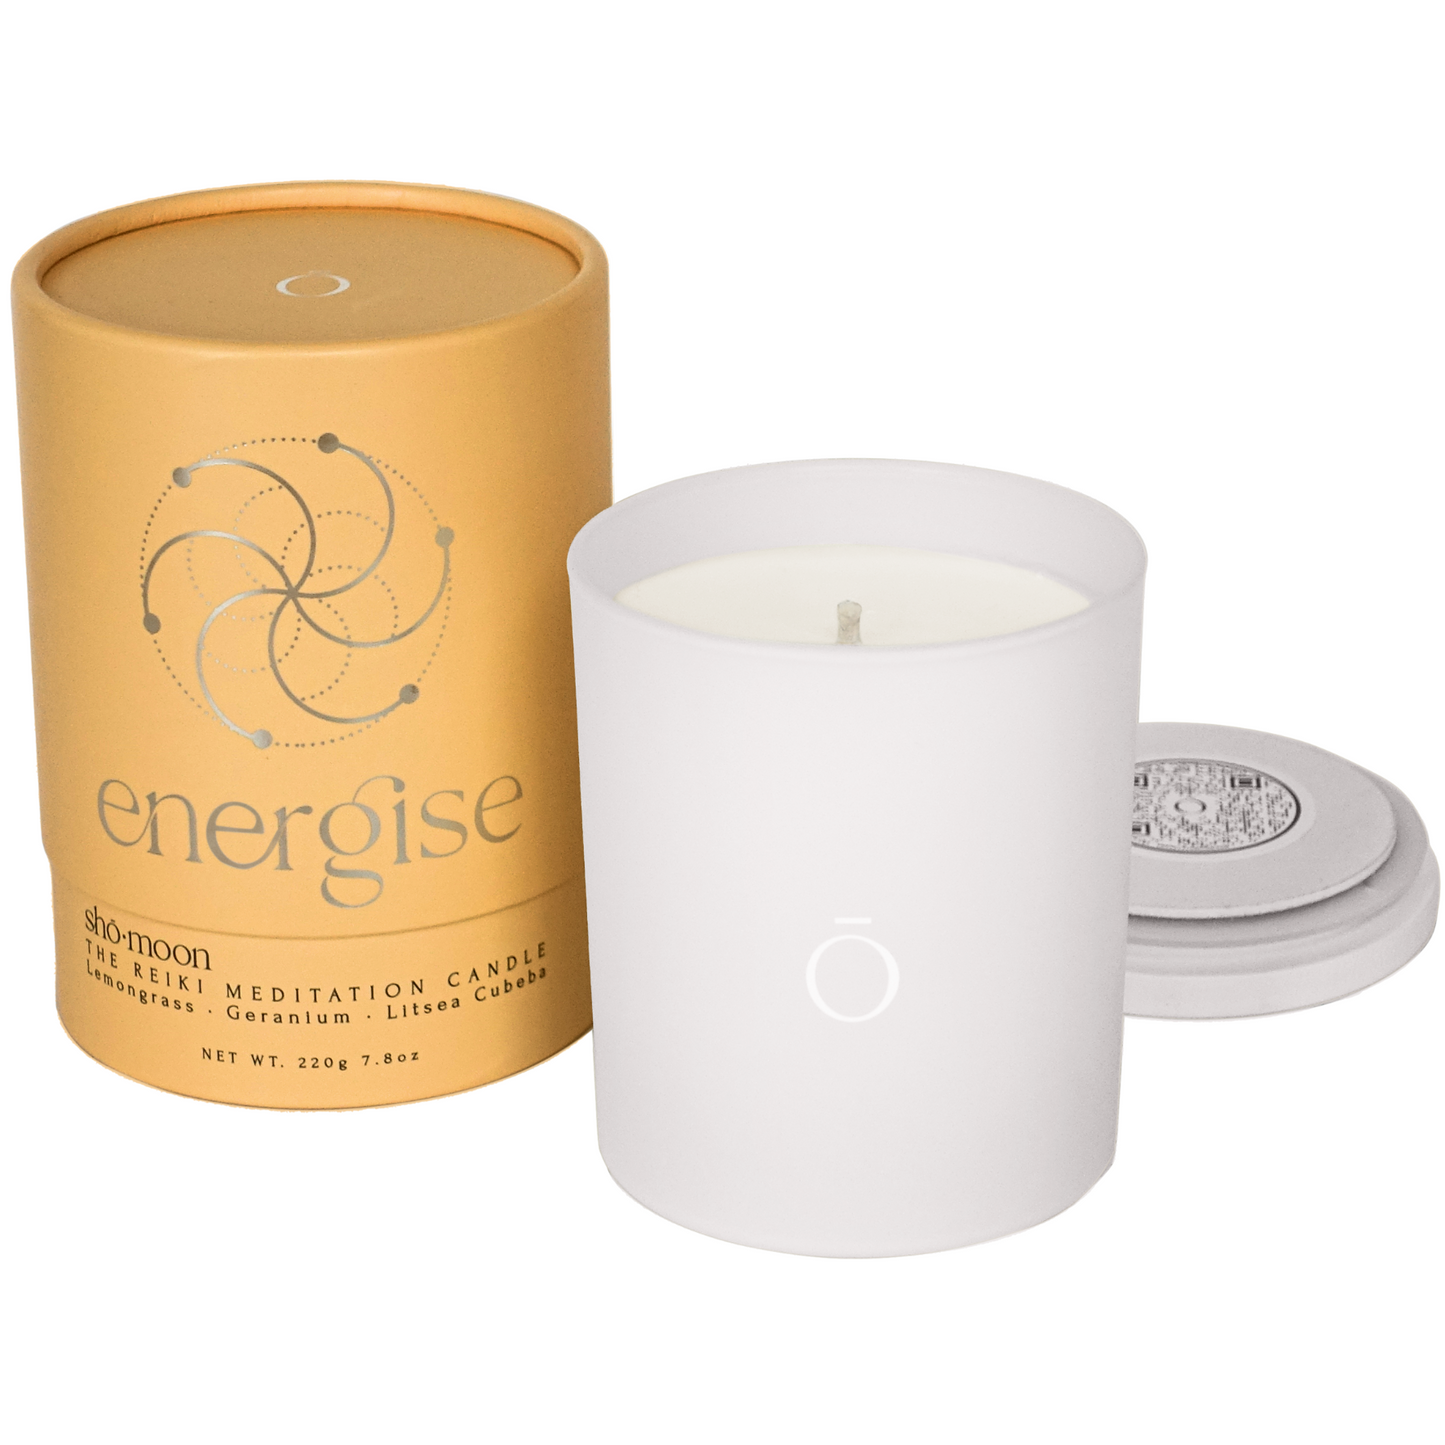 Shō-moon Energise Meditation Candle with pure essentials oils and clean burning natural wax